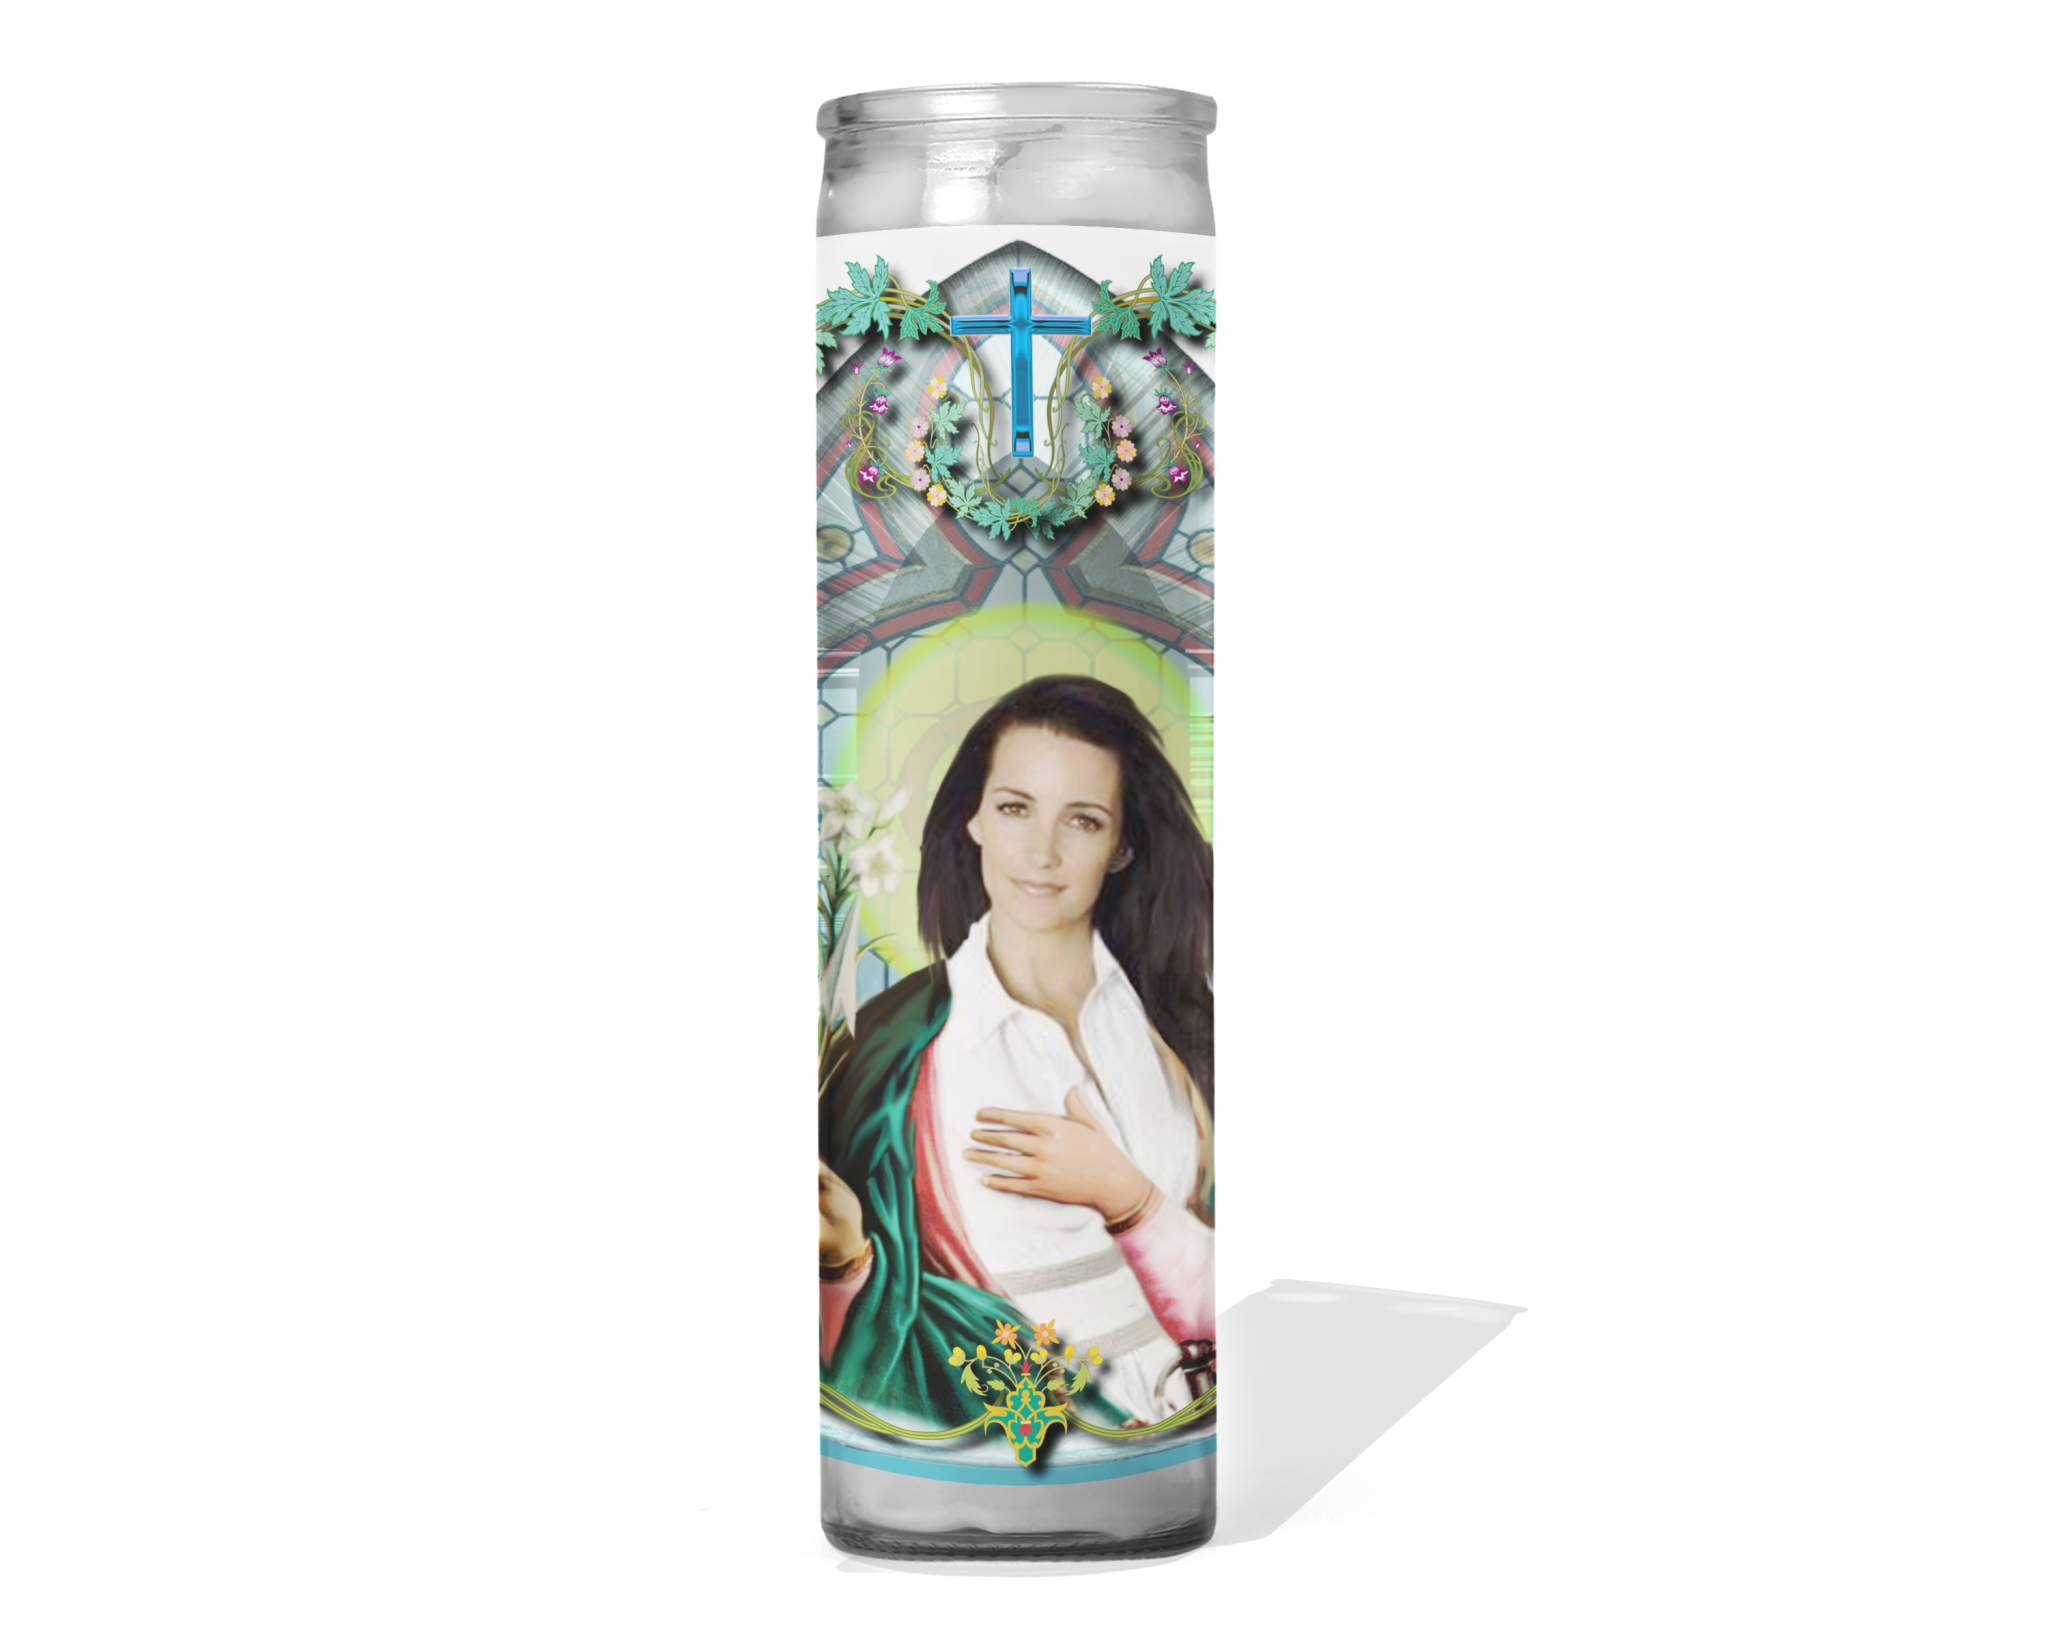 Calm Down Caren Sex And The City Charlotte Celebrity Prayer Candle Ziya Blue